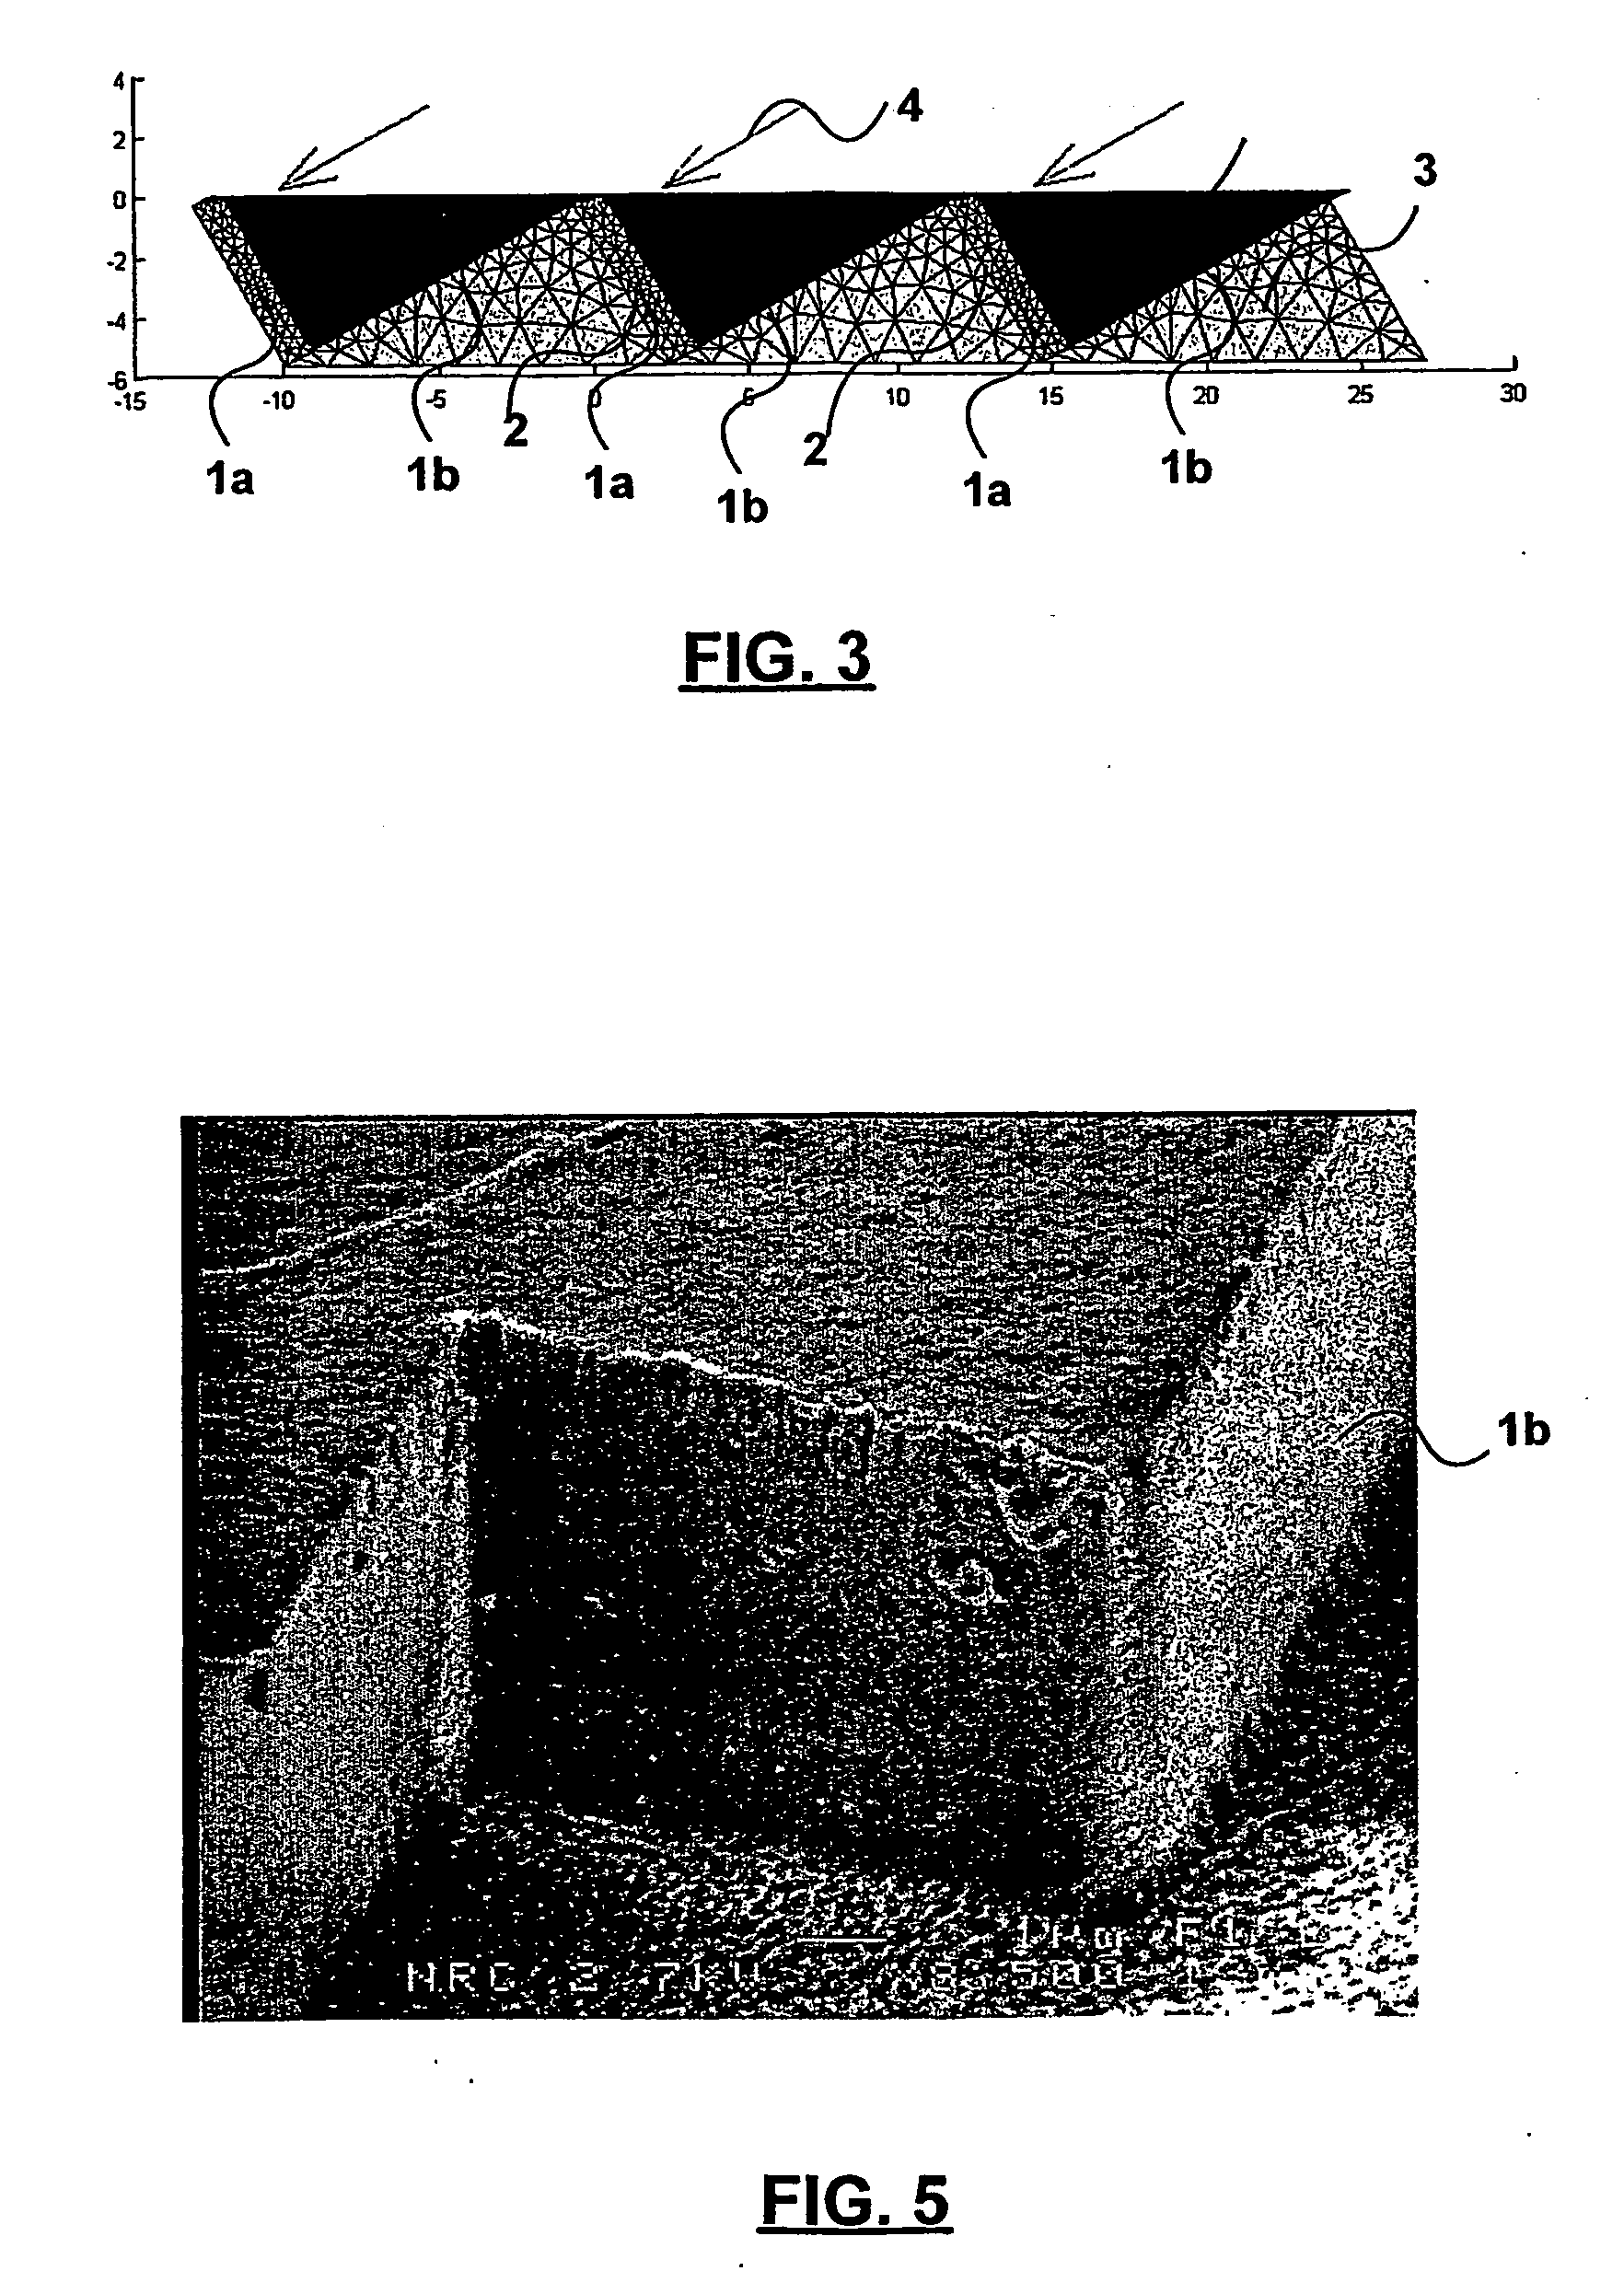 Echelle gratings with low polarization dependent loss ( PDL) using metal coating on the reflecting facets only